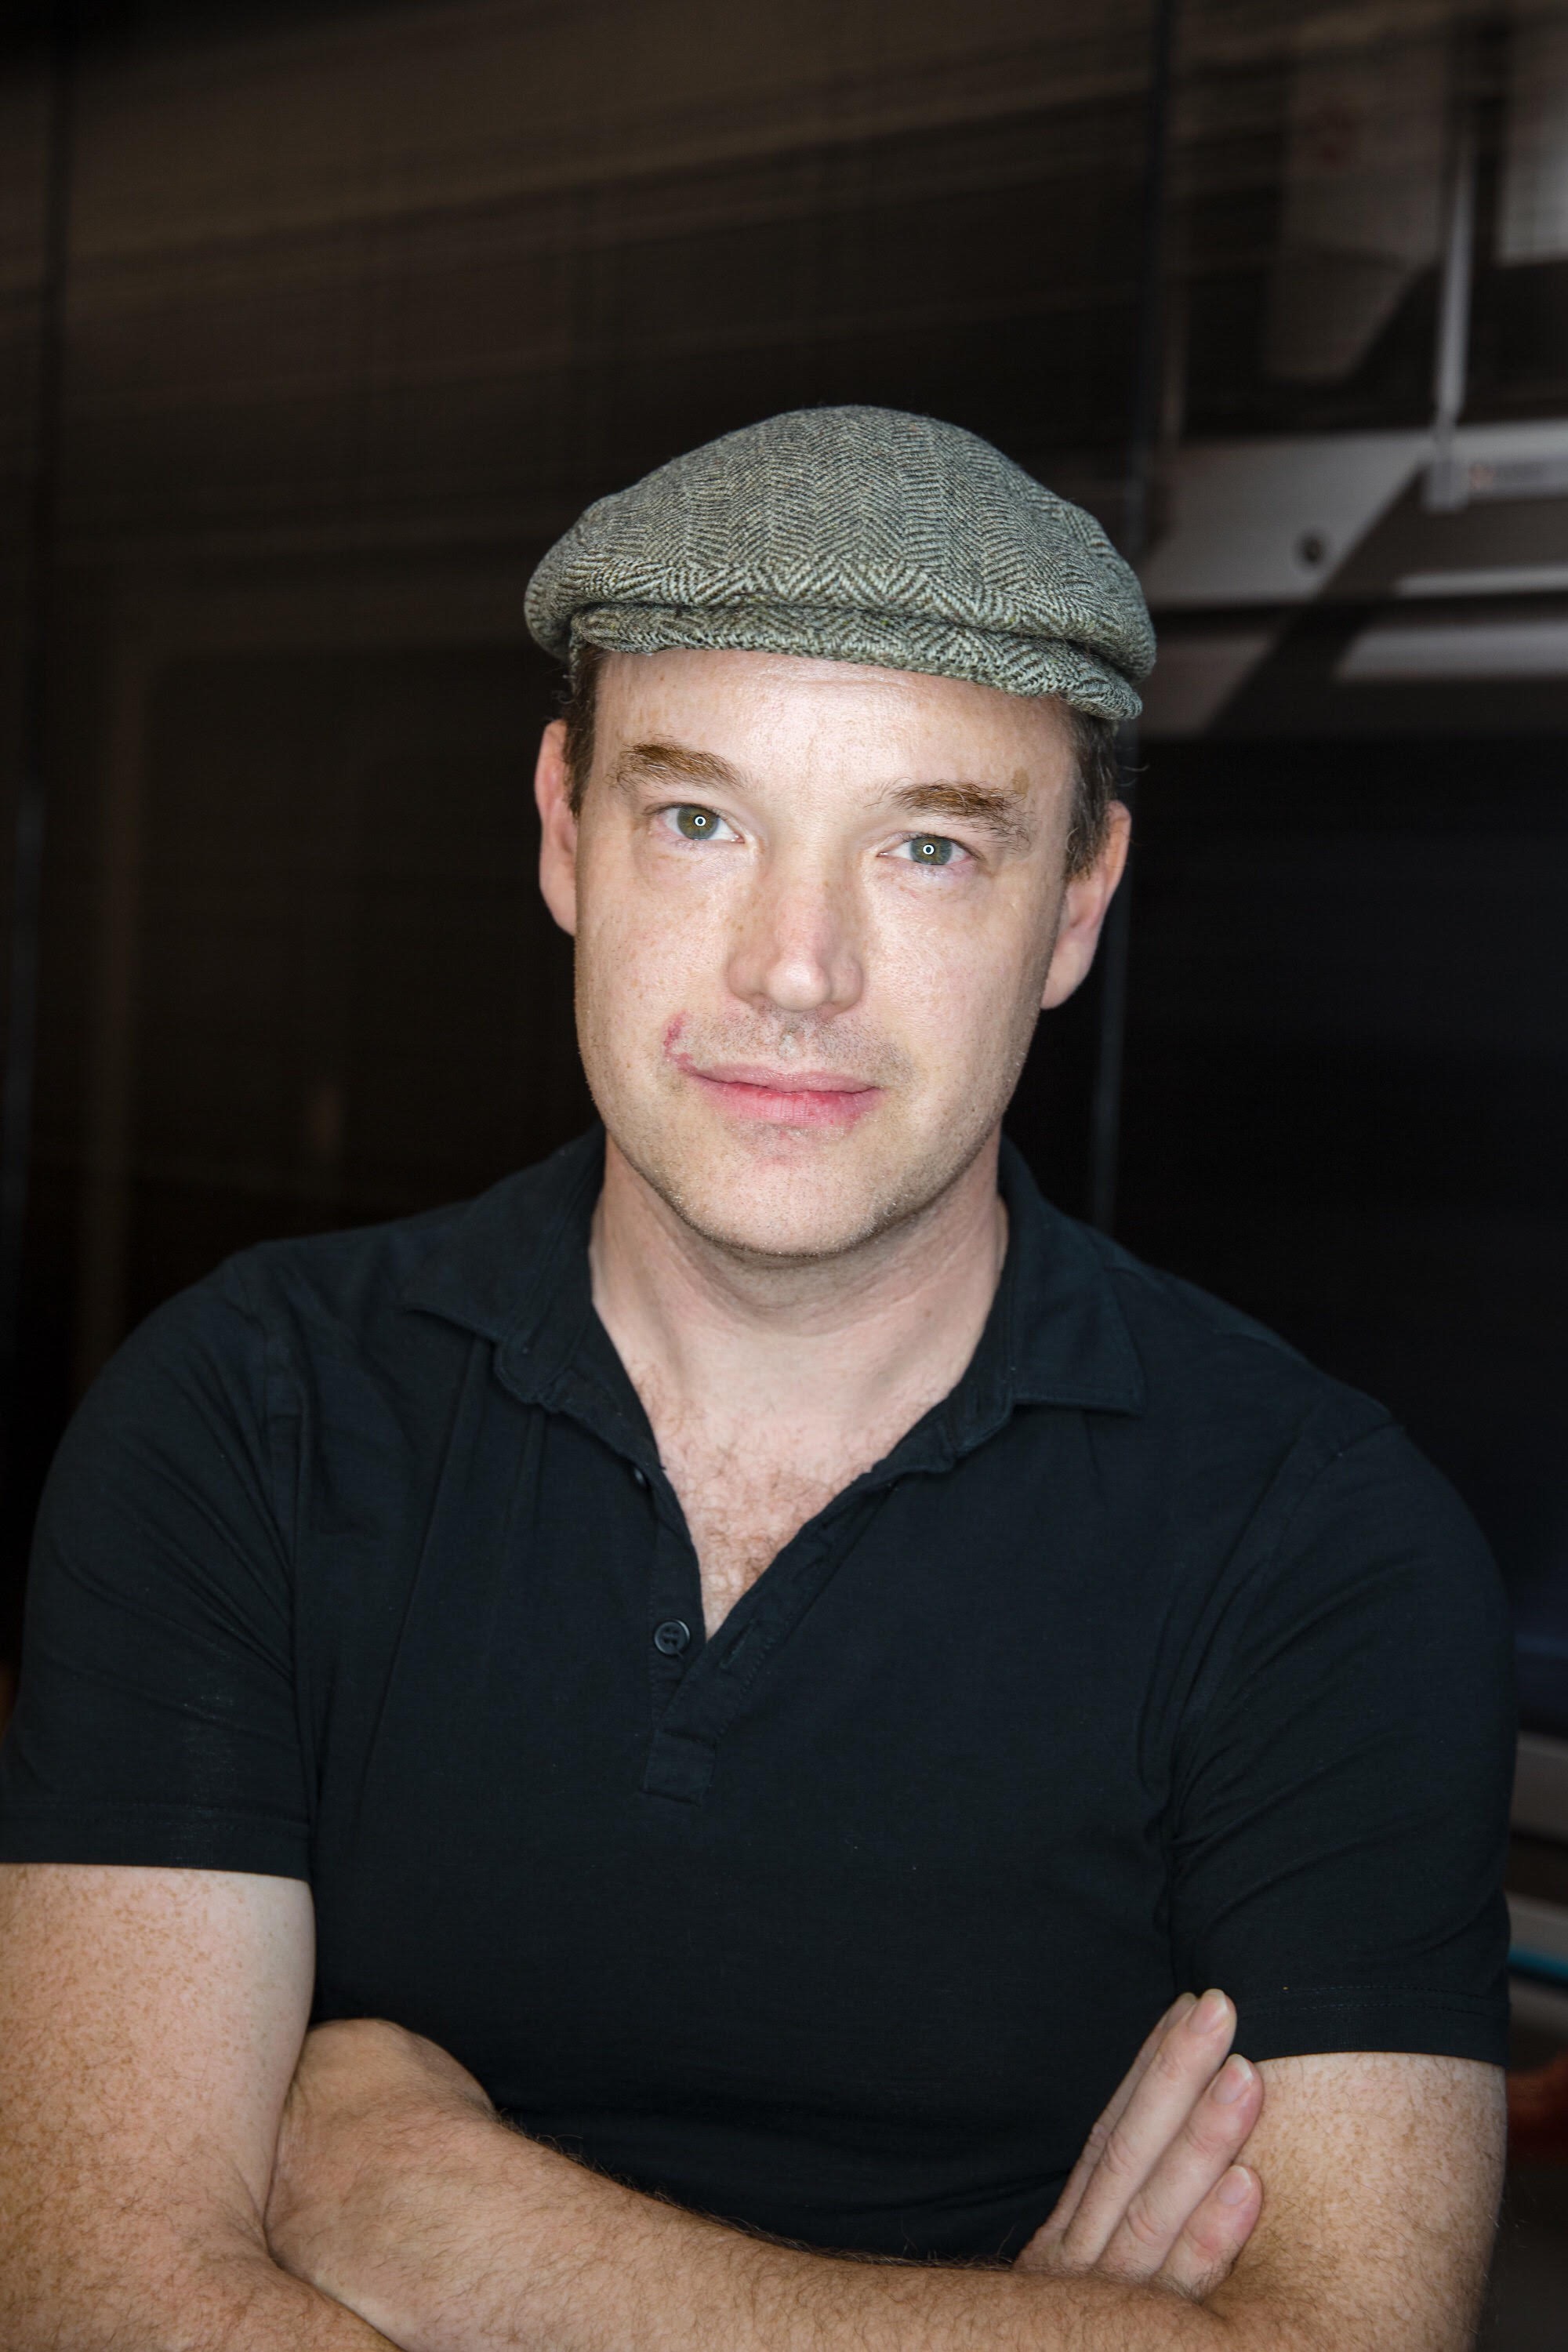 An upper-body shot of Owen. He has dark hair and blue eyes and is wearing a grey beret and a dark polo shirt. His arms are crossed.